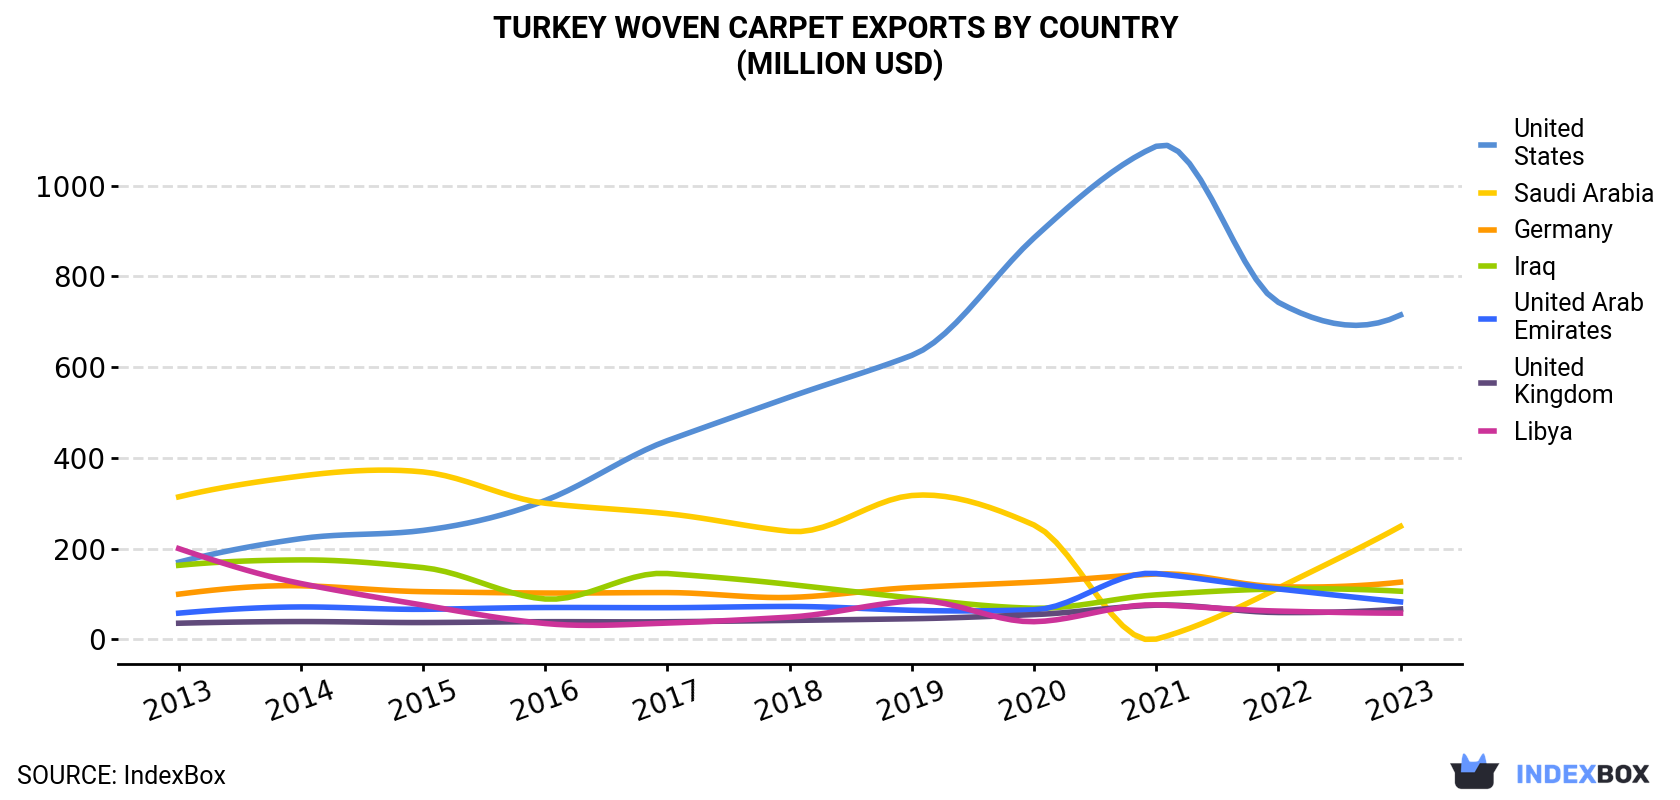 Turkey Woven Carpet Exports By Country (Million USD)